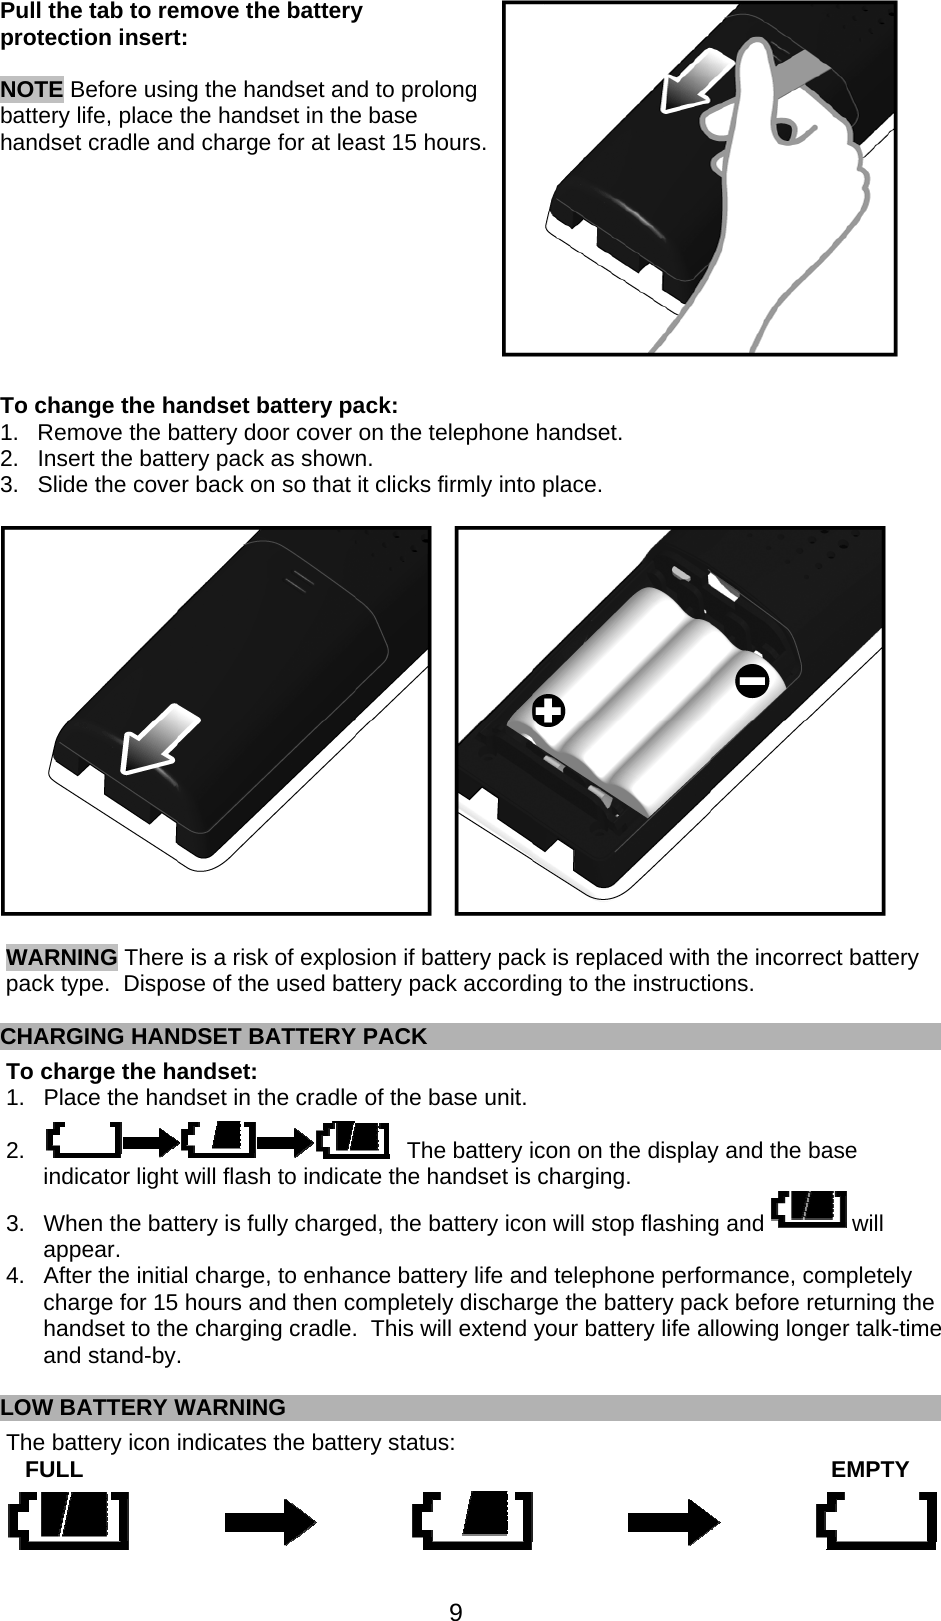  9  Pull the tab to remove the battery protection insert:    NOTE Before using the handset and to prolong battery life, place the handset in the base handset cradle and charge for at least 15 hours.            To change the handset battery pack: 1.  Remove the battery door cover on the telephone handset. 2.  Insert the battery pack as shown. 3.  Slide the cover back on so that it clicks firmly into place.    WARNING There is a risk of explosion if battery pack is replaced with the incorrect battery pack type.  Dispose of the used battery pack according to the instructions.  CHARGING HANDSET BATTERY PACK To charge the handset:  1.  Place the handset in the cradle of the base unit.  2.                                                           The battery icon on the display and the base indicator light will flash to indicate the handset is charging. 3.  When the battery is fully charged, the battery icon will stop flashing and   will appear. 4.  After the initial charge, to enhance battery life and telephone performance, completely charge for 15 hours and then completely discharge the battery pack before returning the handset to the charging cradle.  This will extend your battery life allowing longer talk-time and stand-by.  LOW BATTERY WARNING The battery icon indicates the battery status:    FULL          EMPTY  